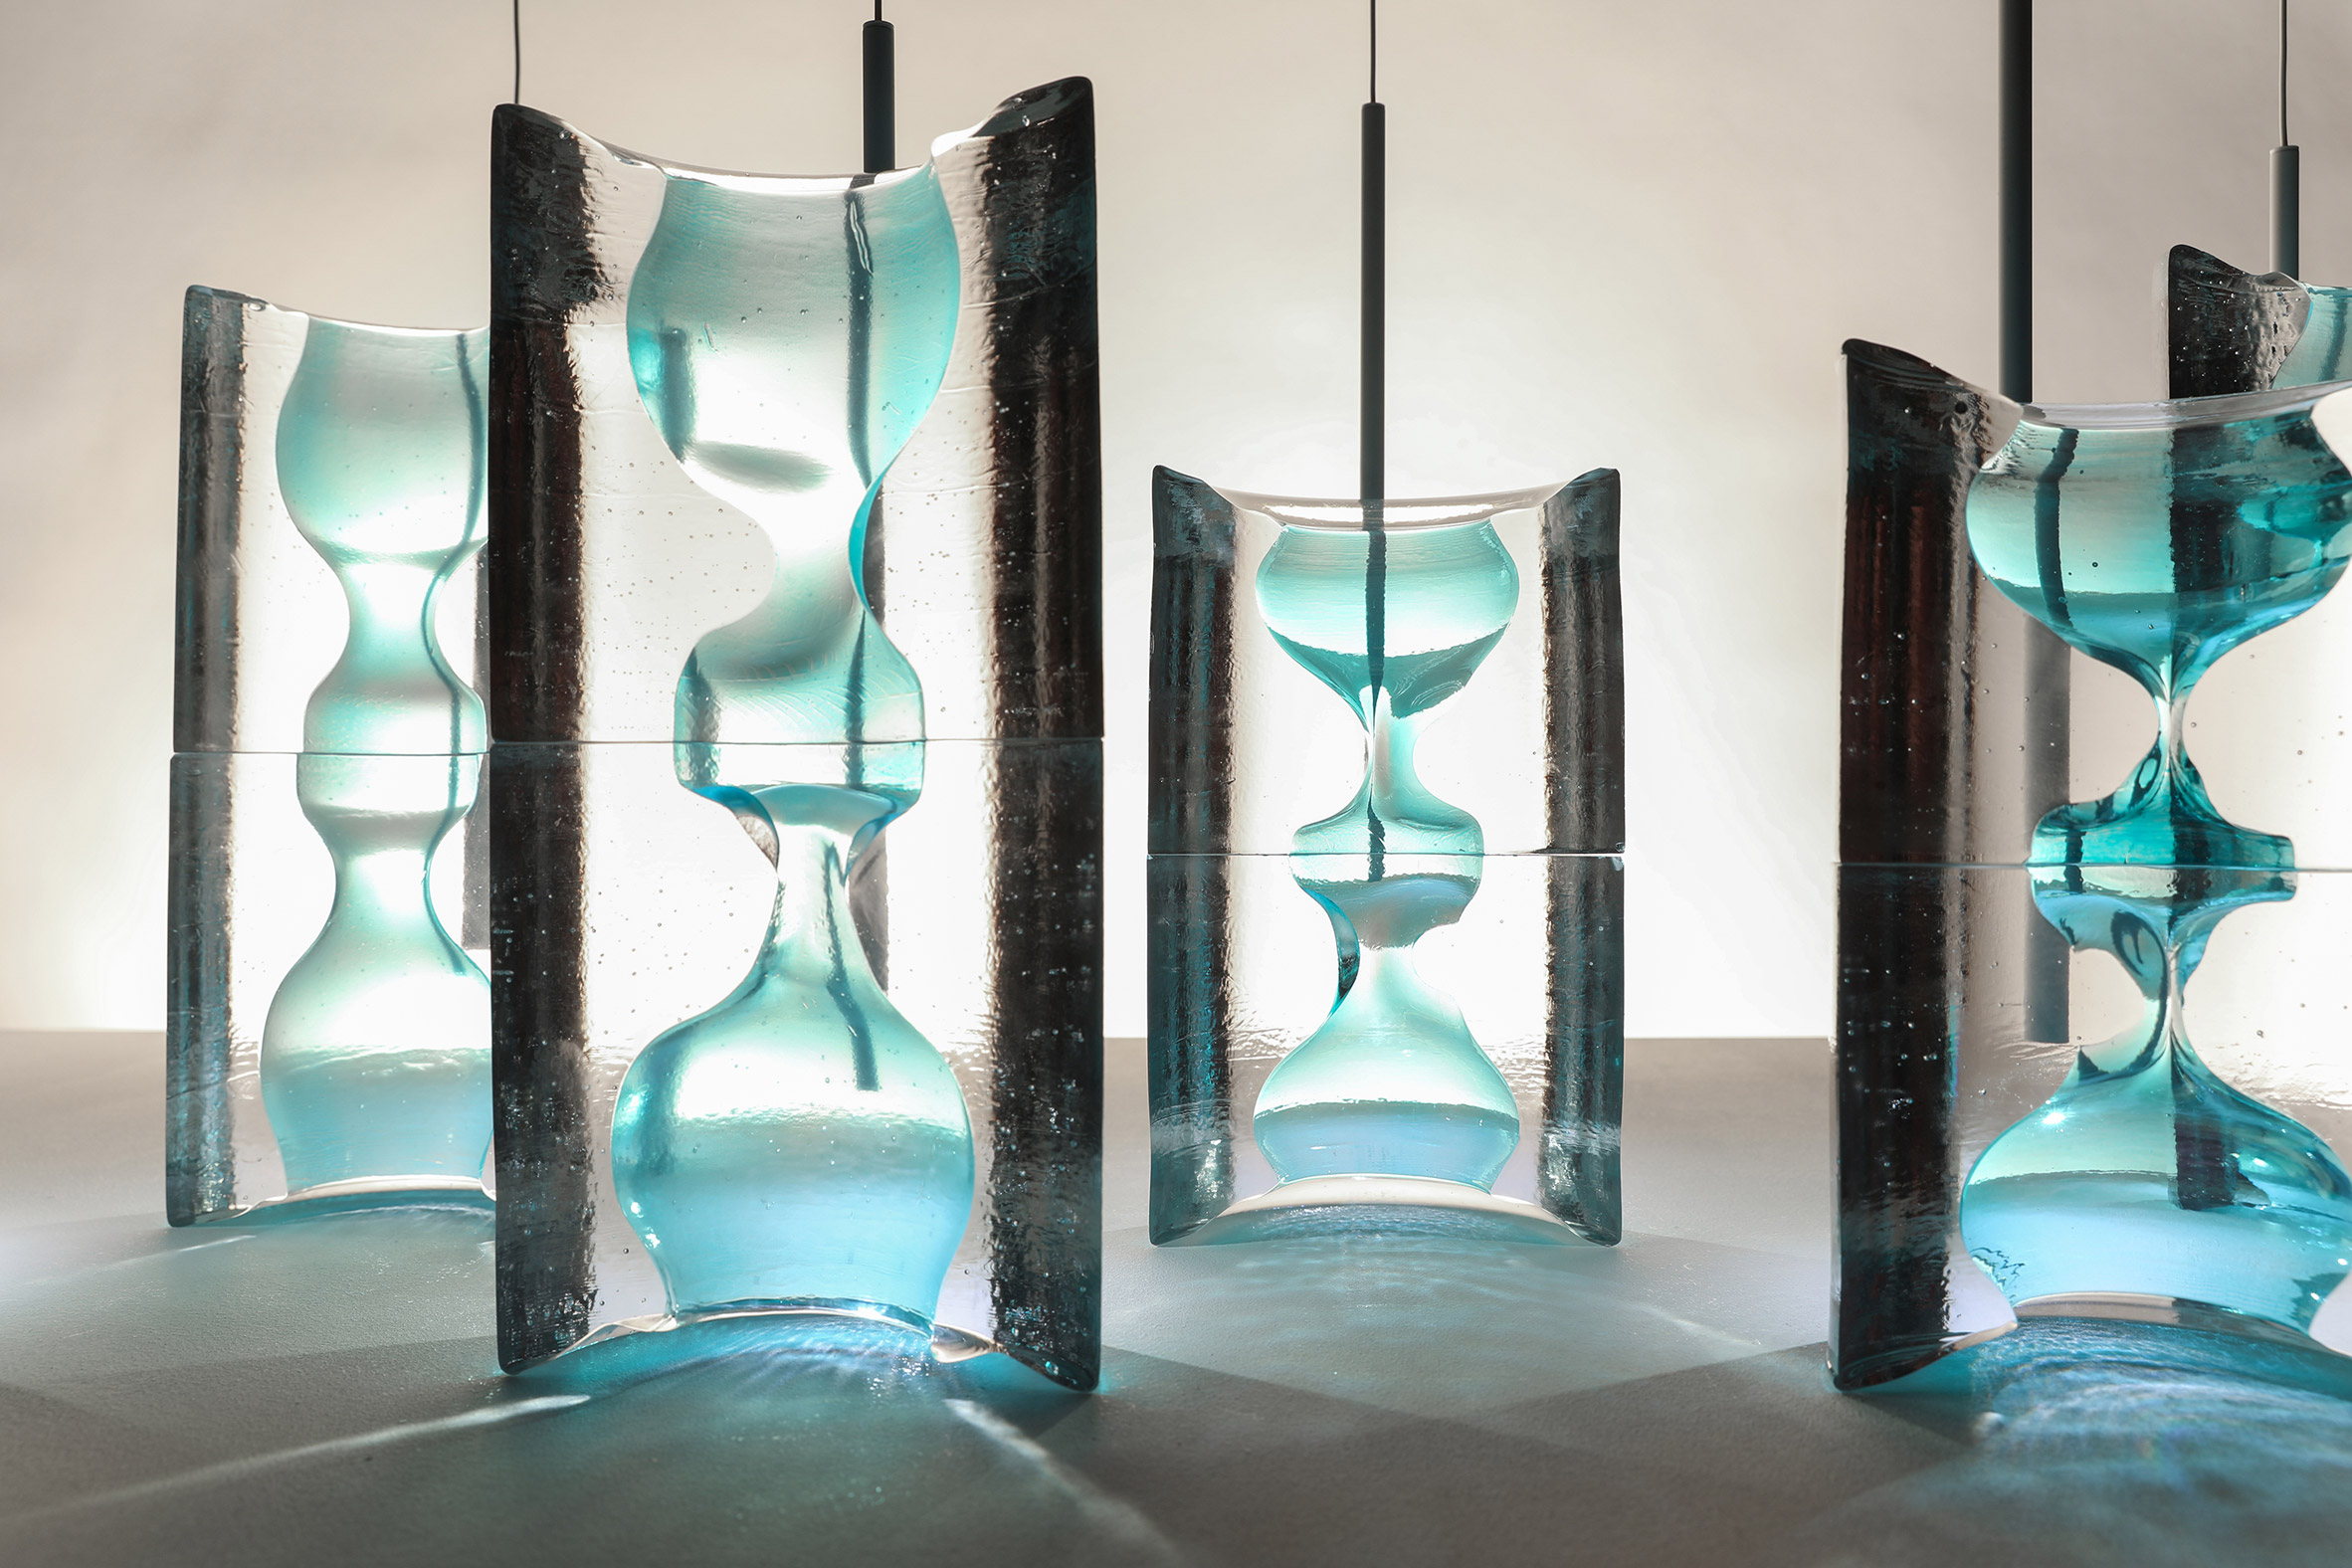 Atelier Oï previews new glass collection in live talk and tour